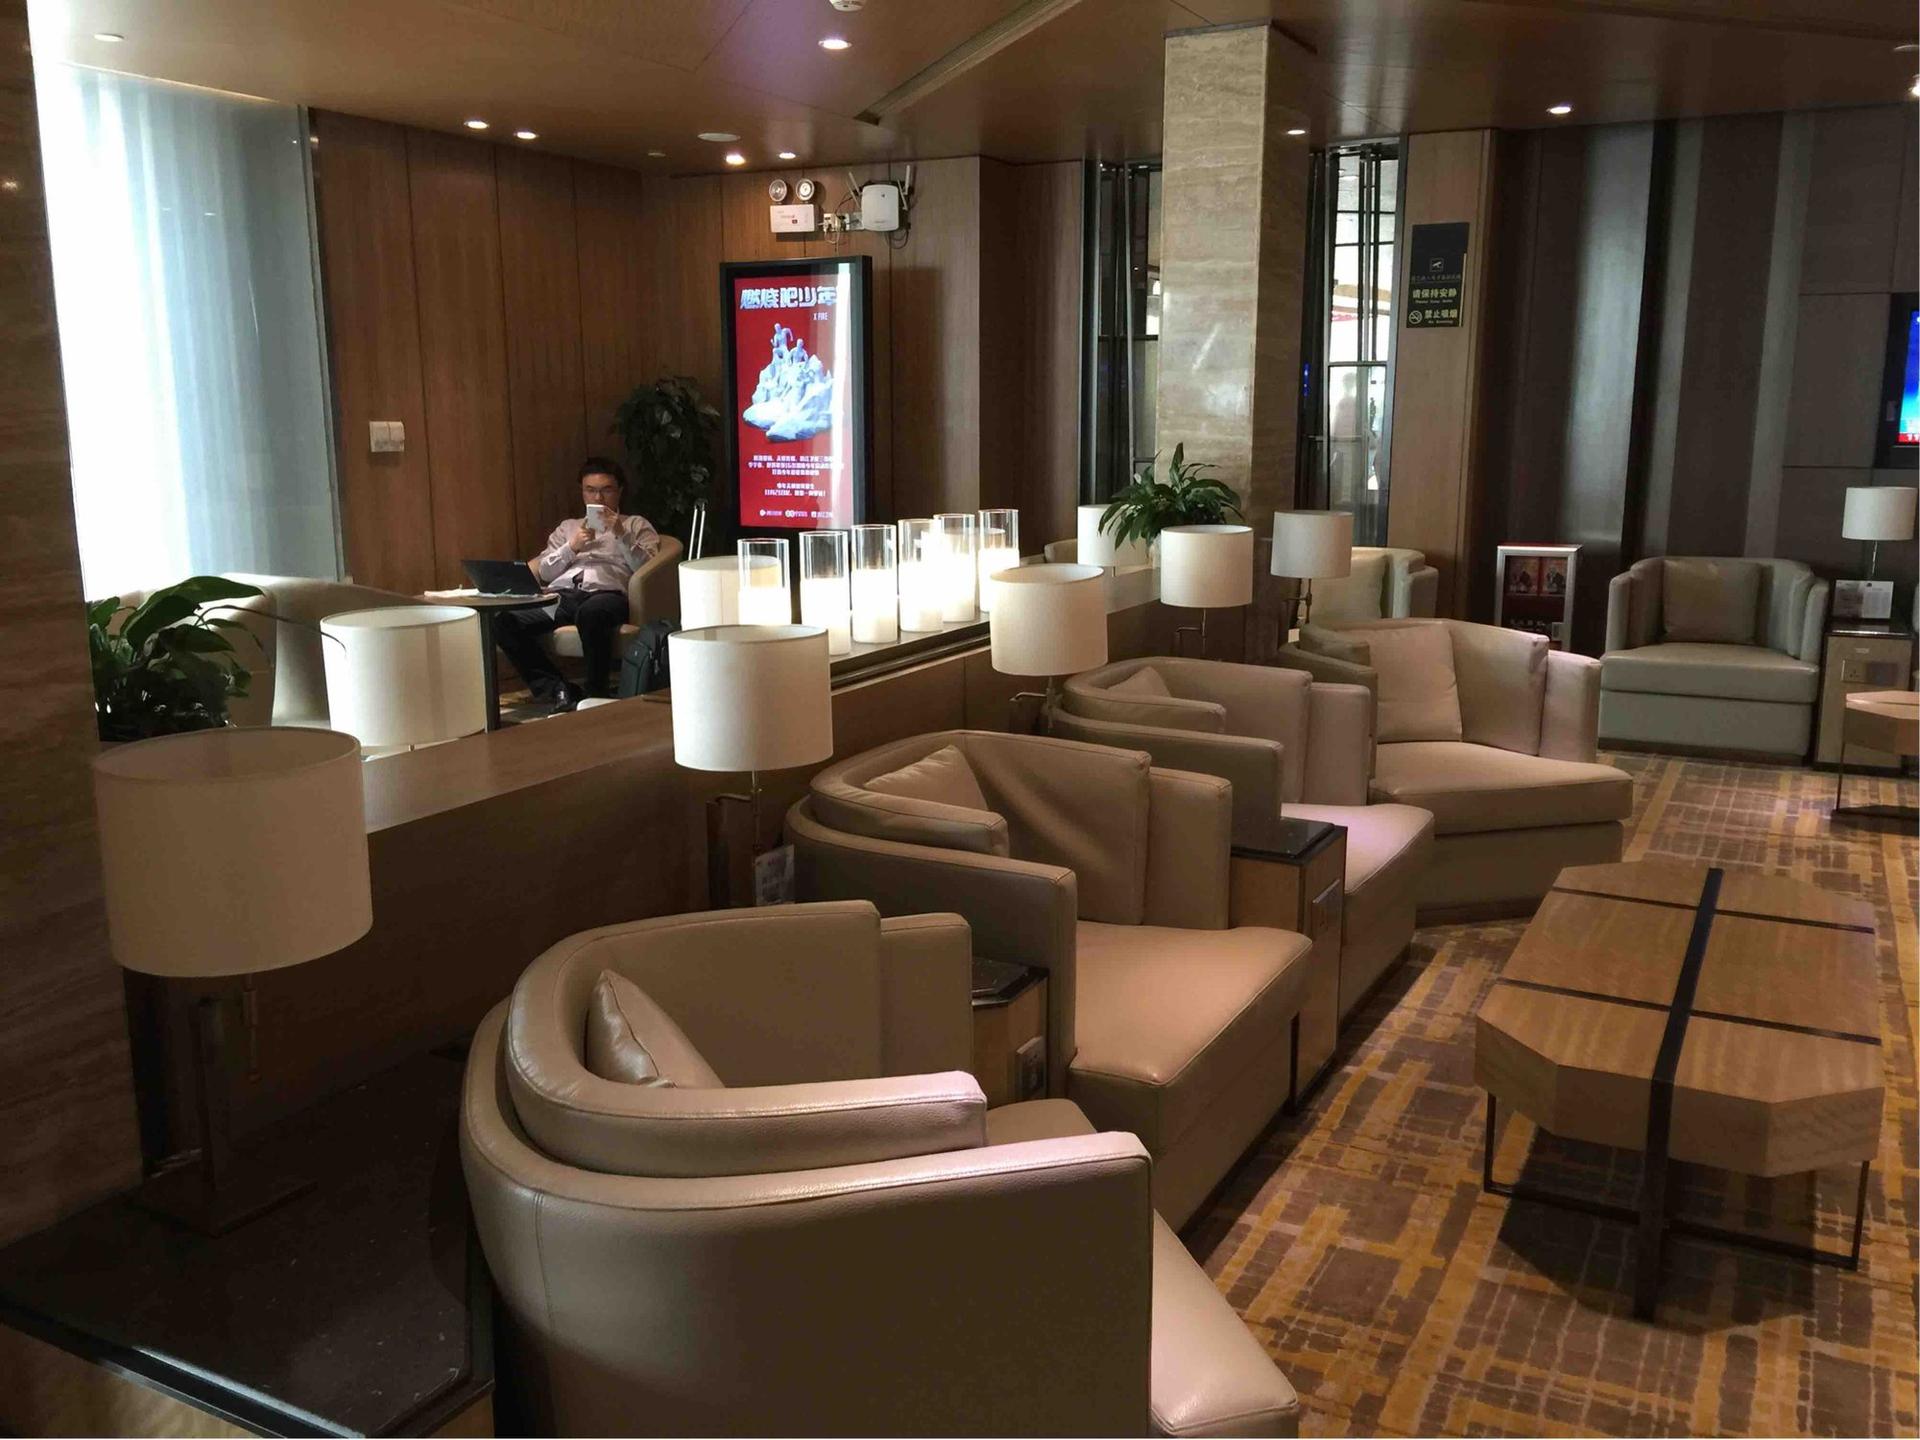 Baiyun Airport First Class Lounge (Closed For Renovation) image 7 of 10